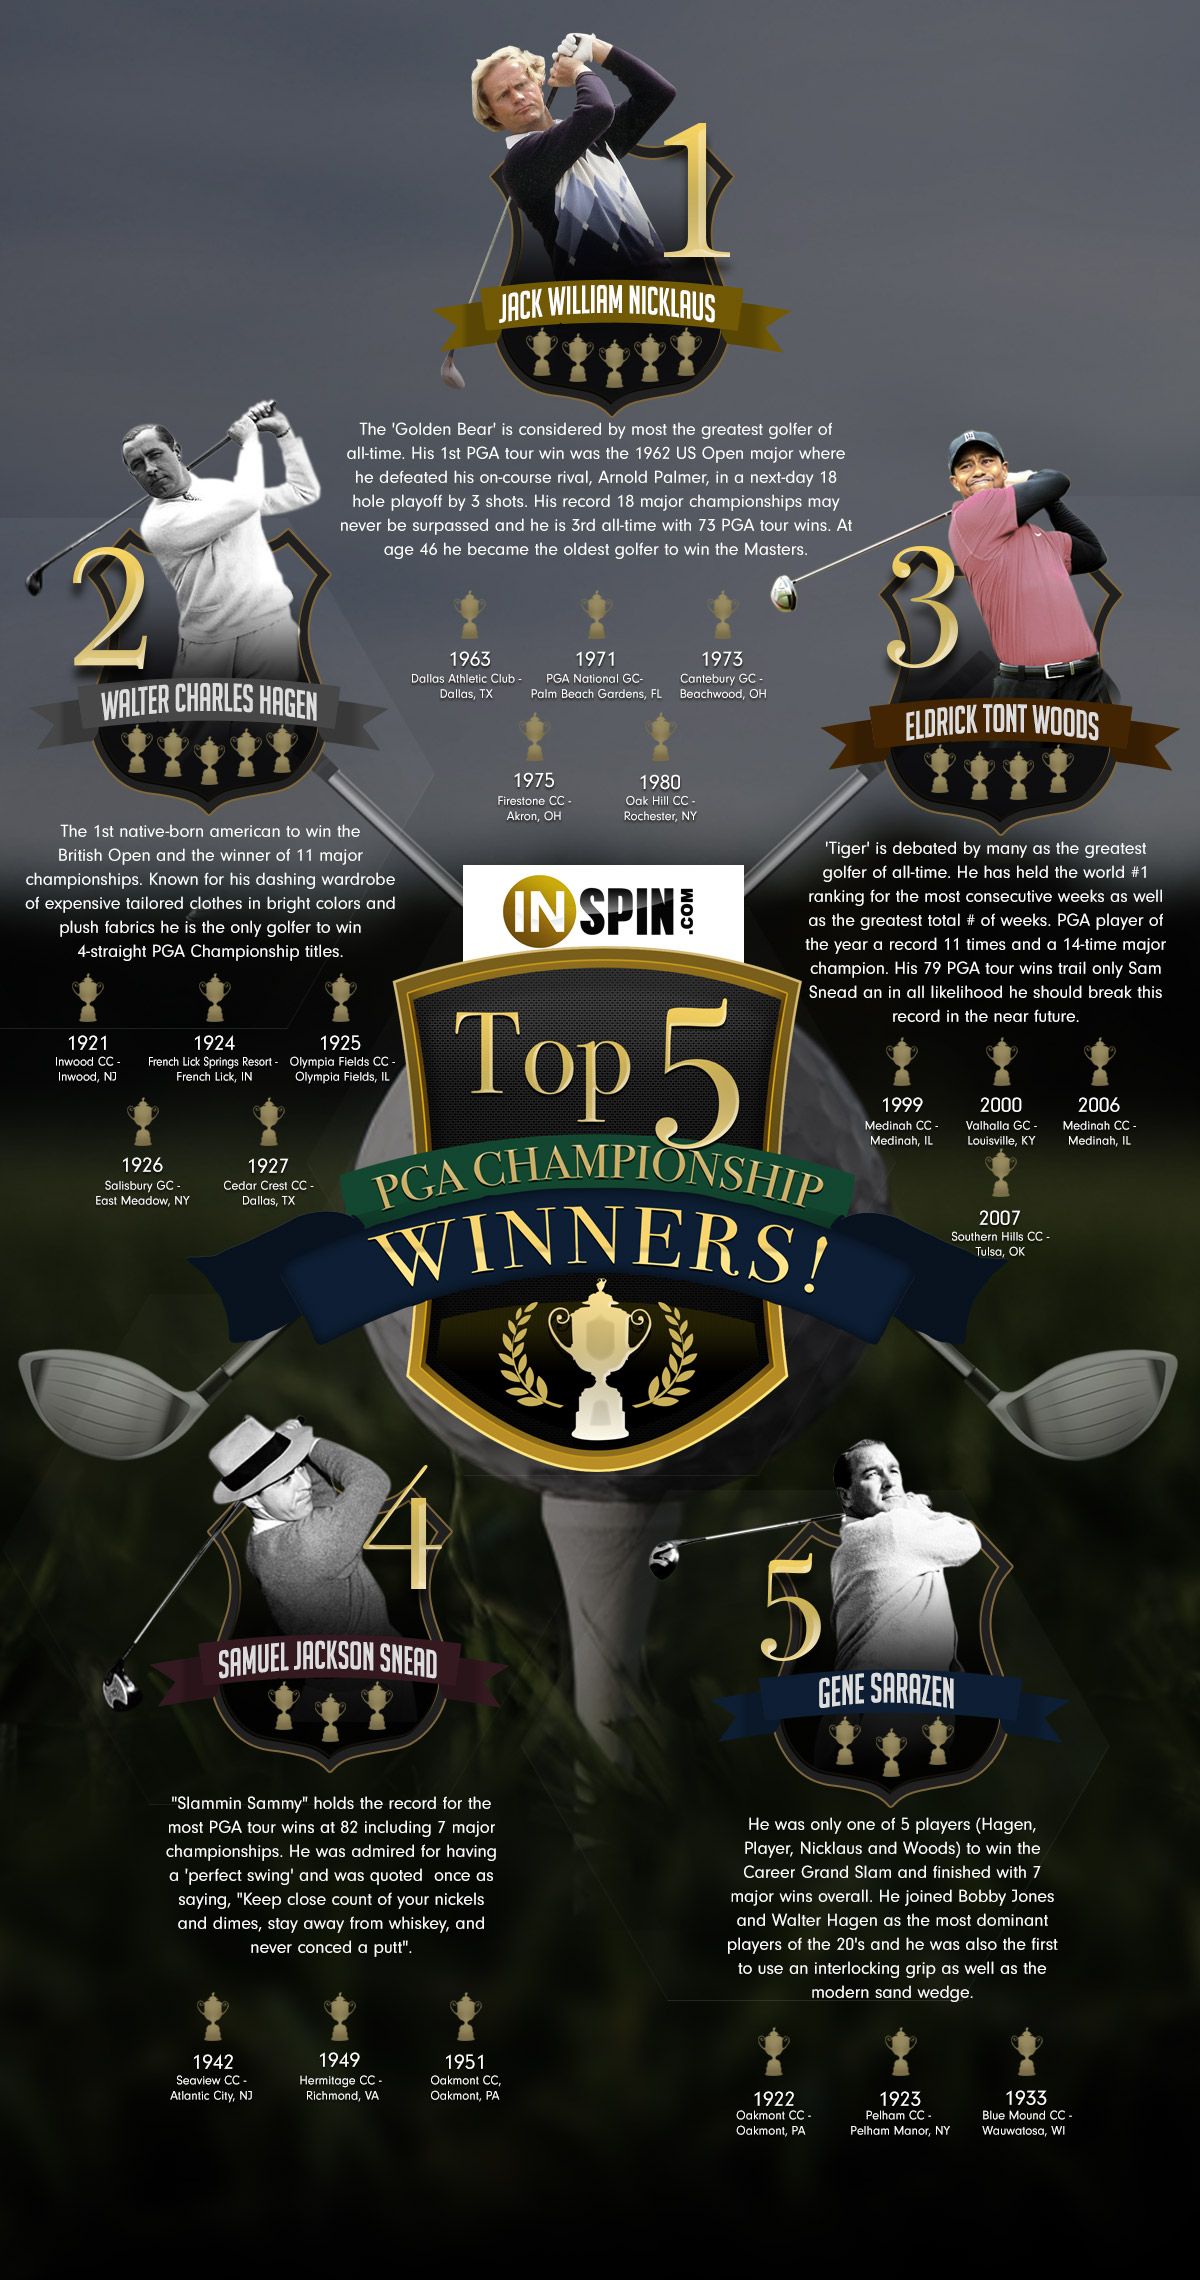 Top 5 PGA Championship Winners Infographic by inspin.com